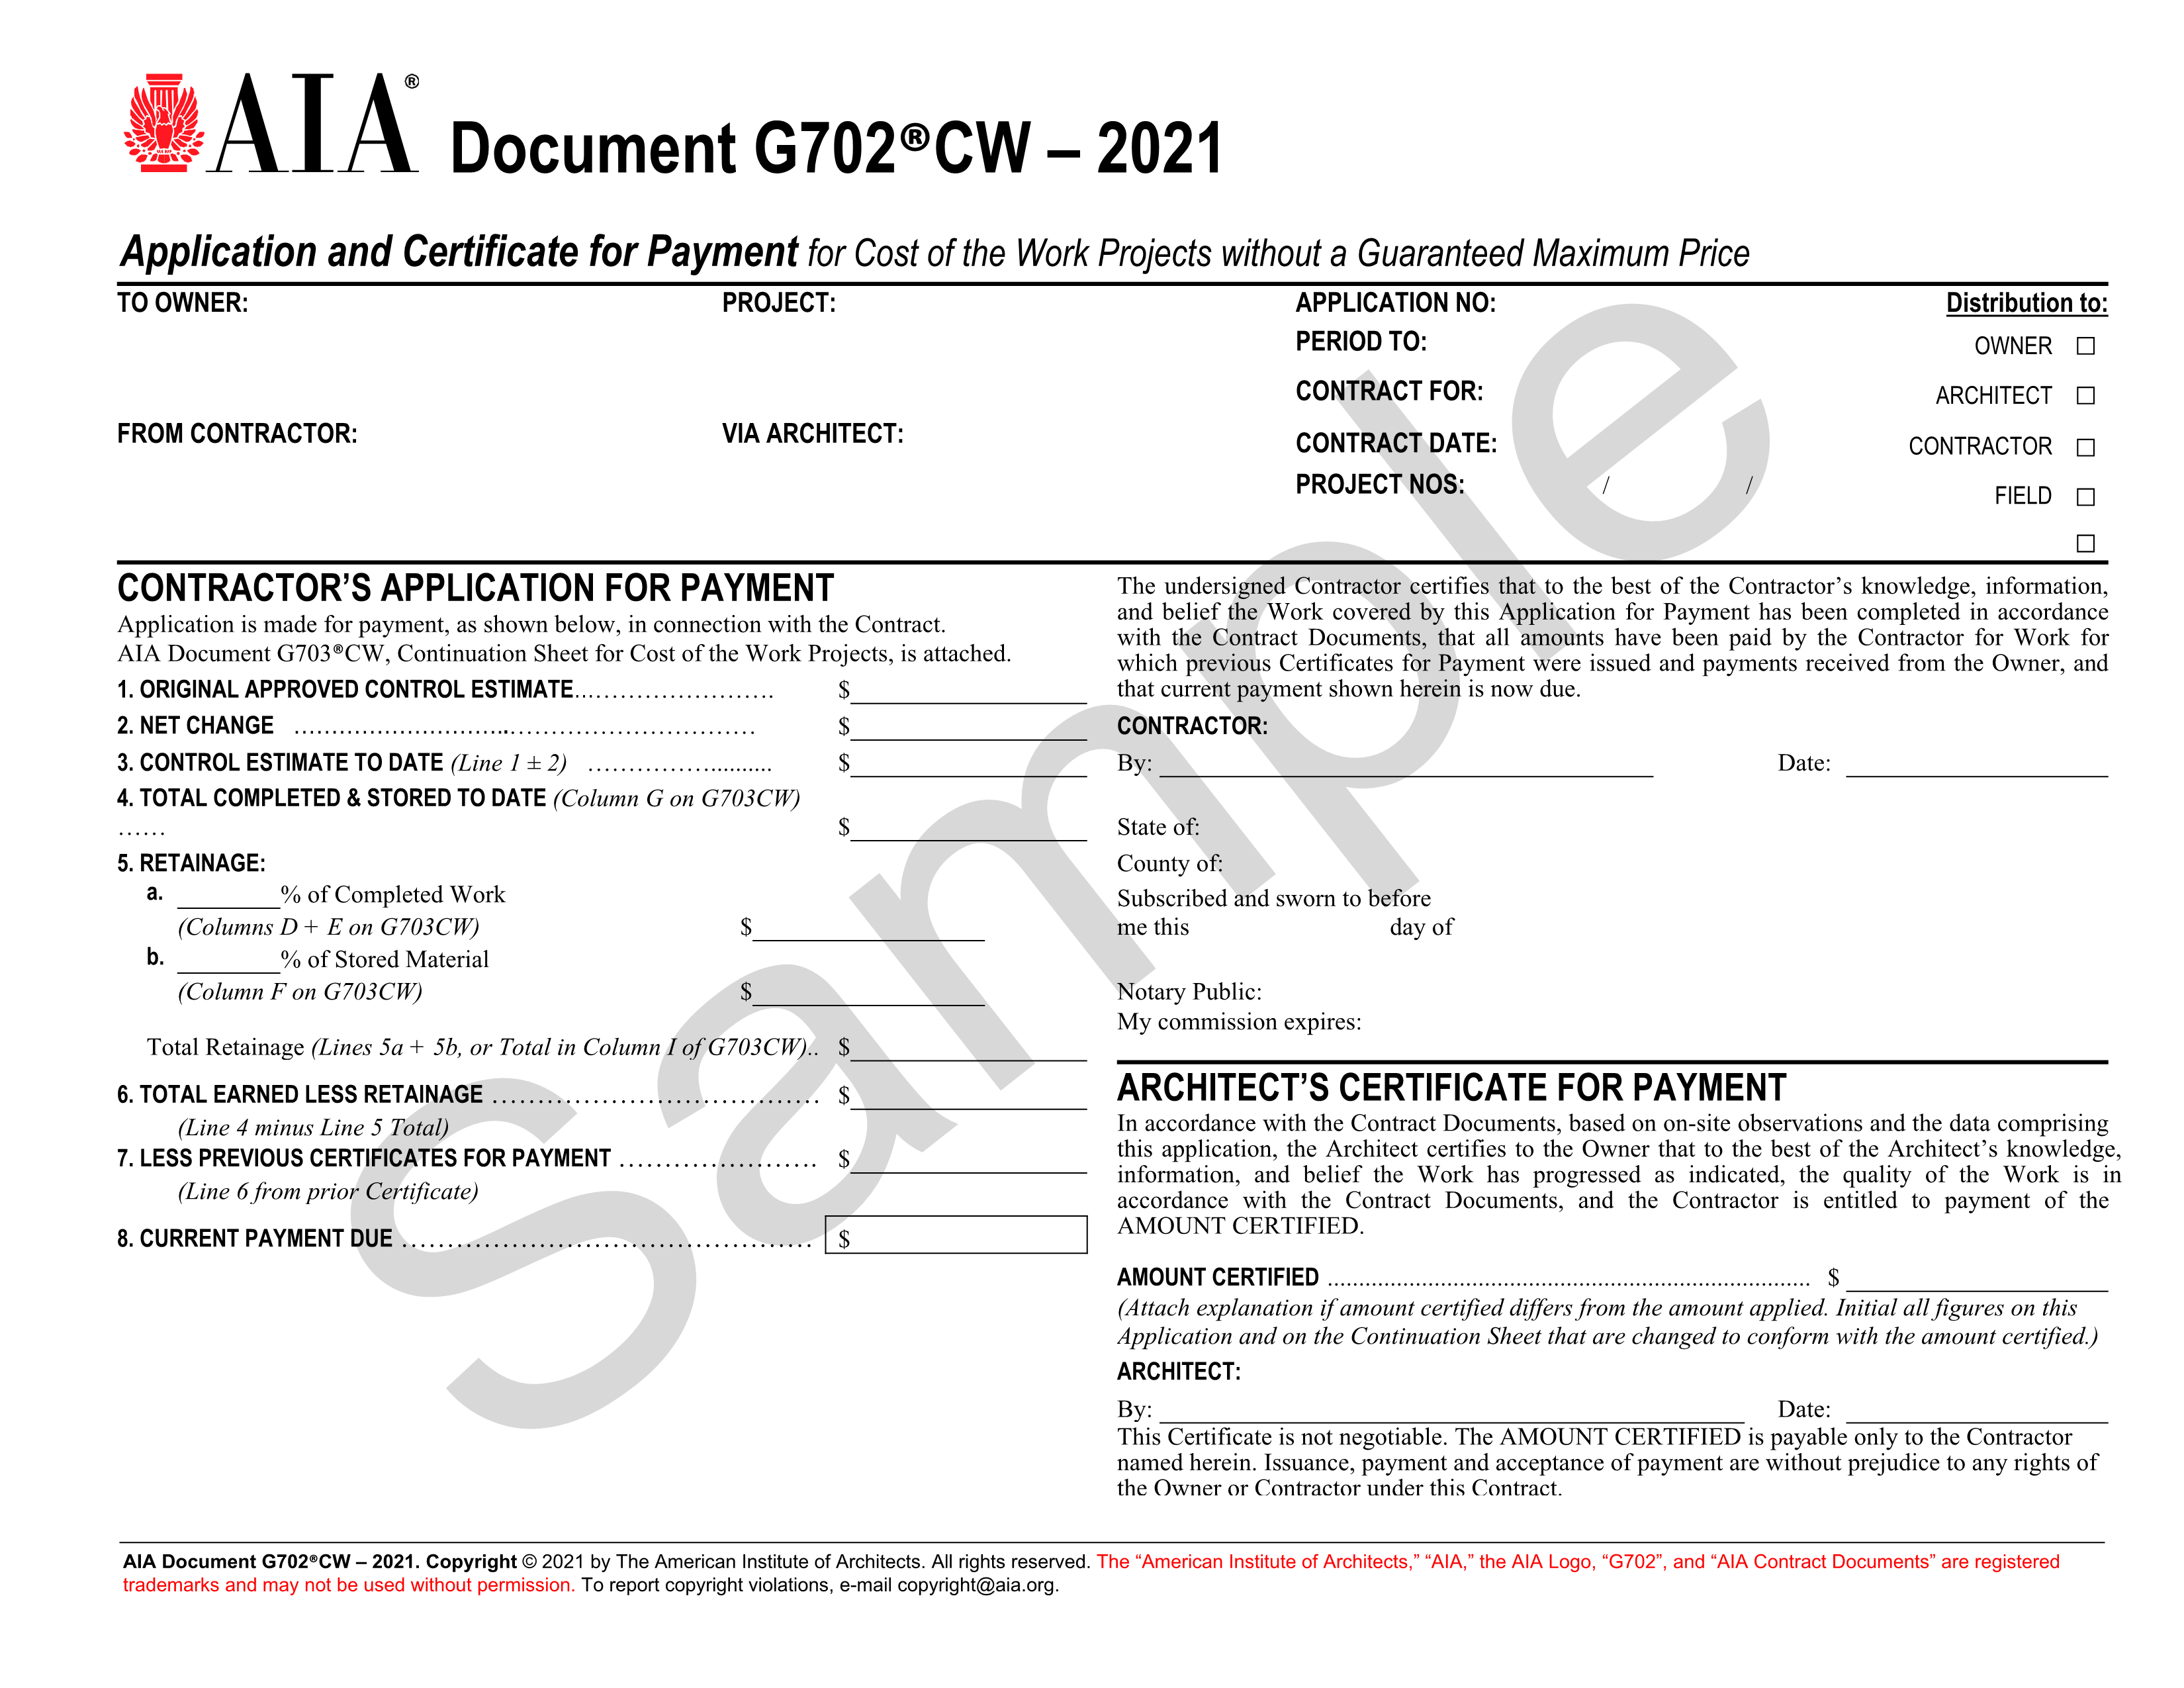 AIA G702®CW Application and Certificate for Payment GMP Industry